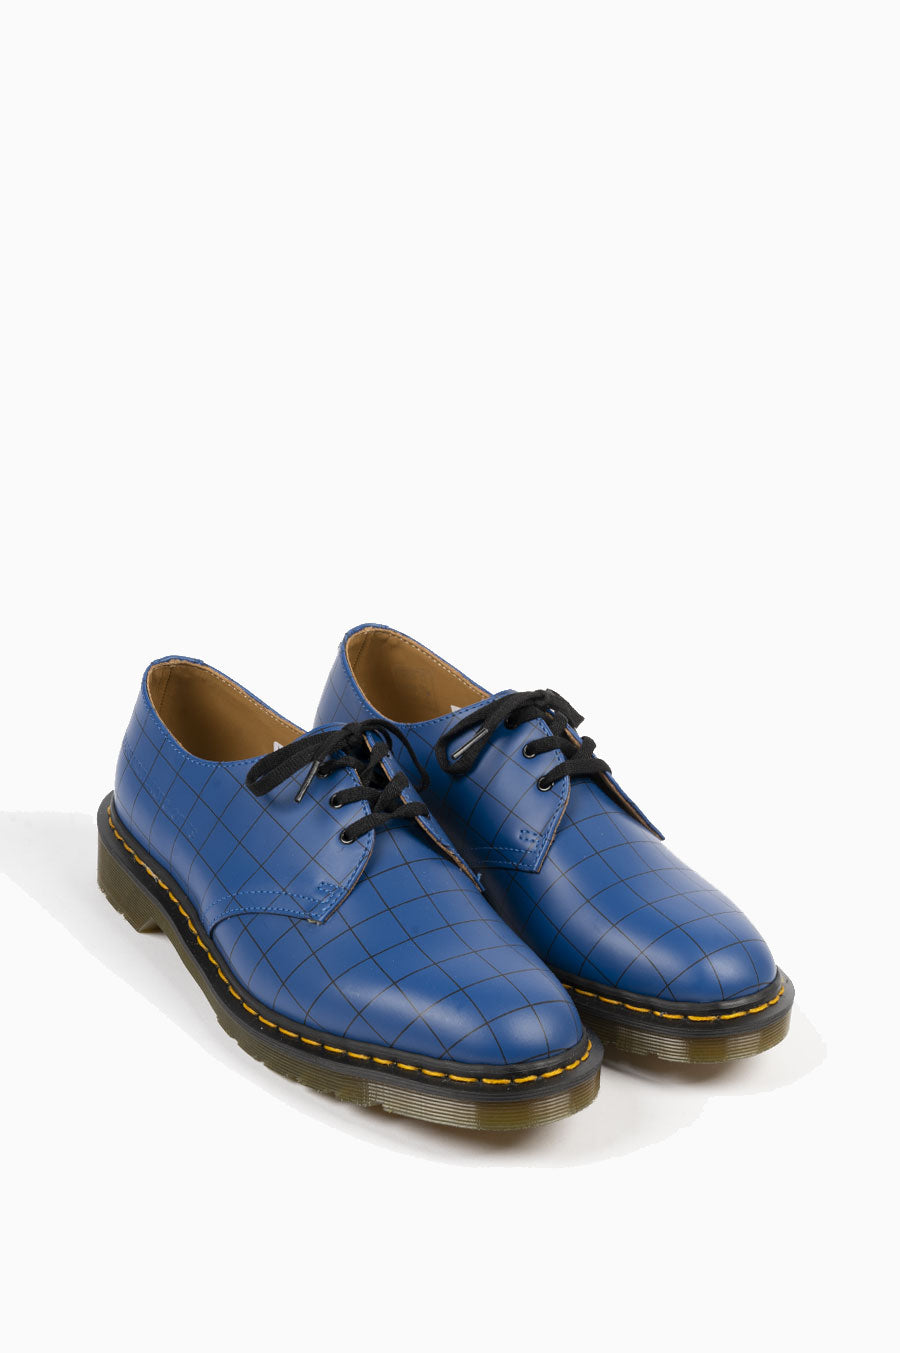 DR MARTENS X UNDERCOVER 1461 CHECK SMOOTH BLUE